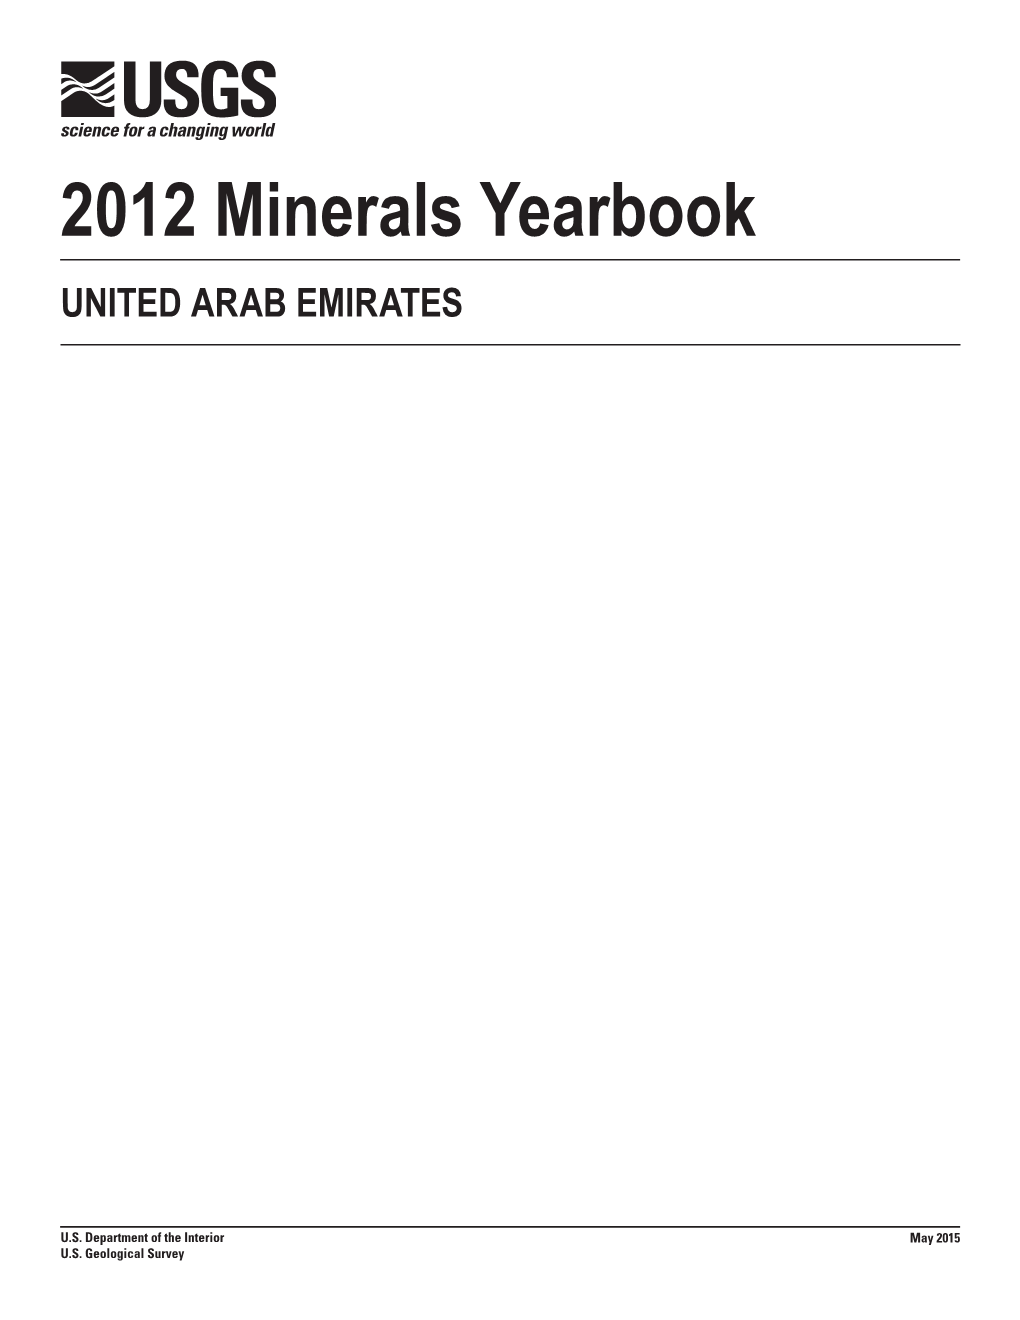 The Mineral Industry of the United Arab Emirates in 2012